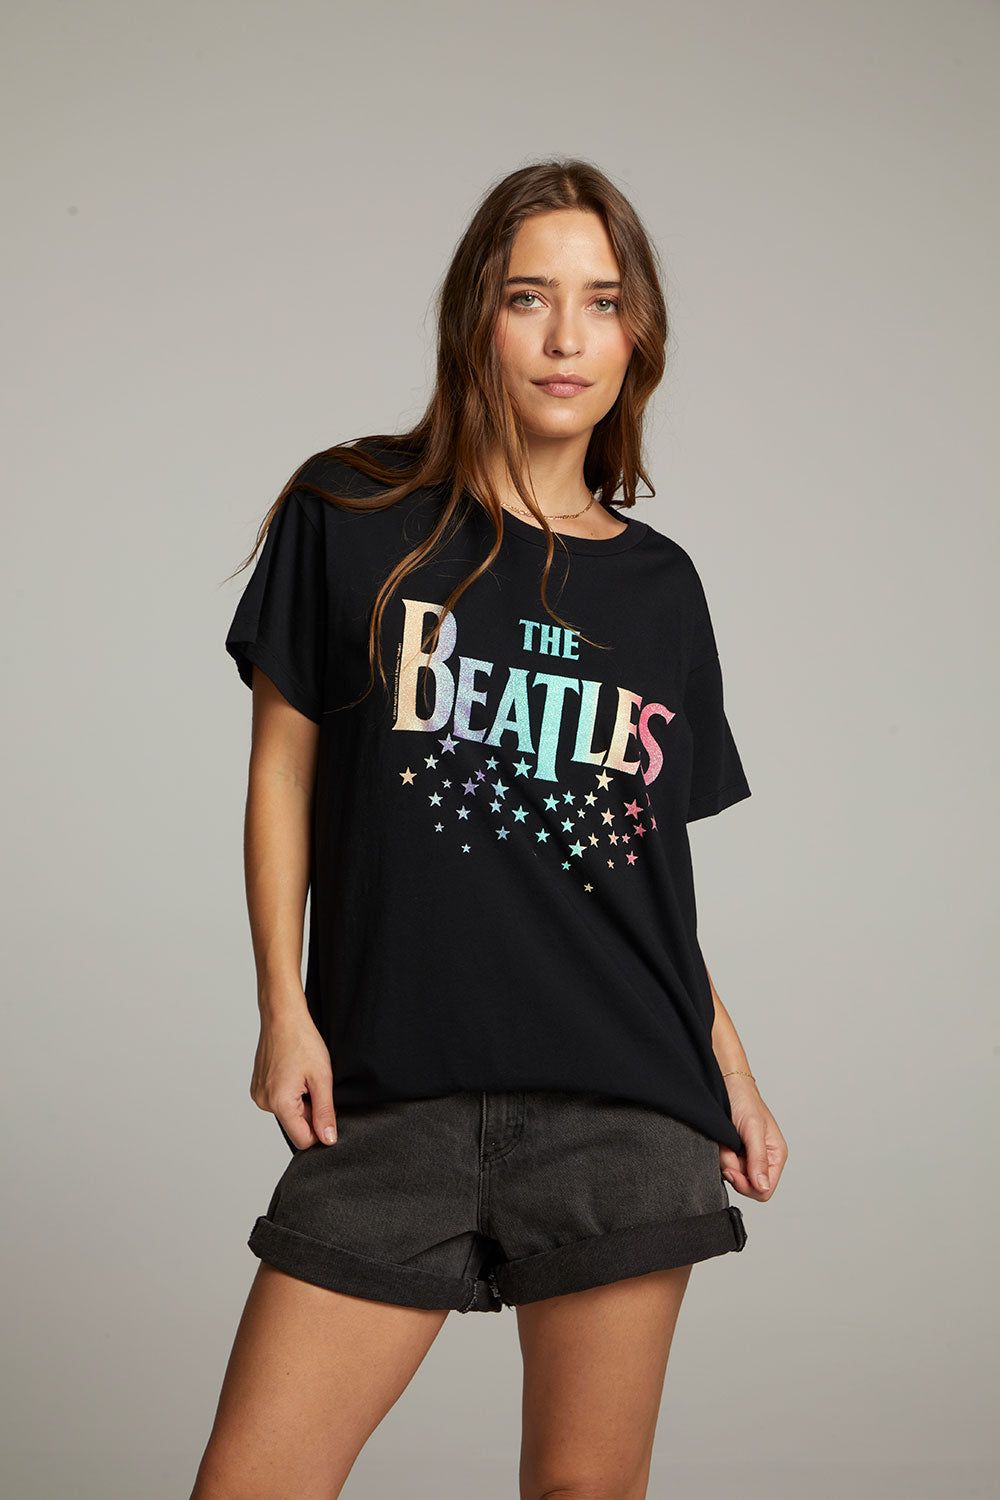 The Beatles Rainbow Tee WOMENS chaserbrand